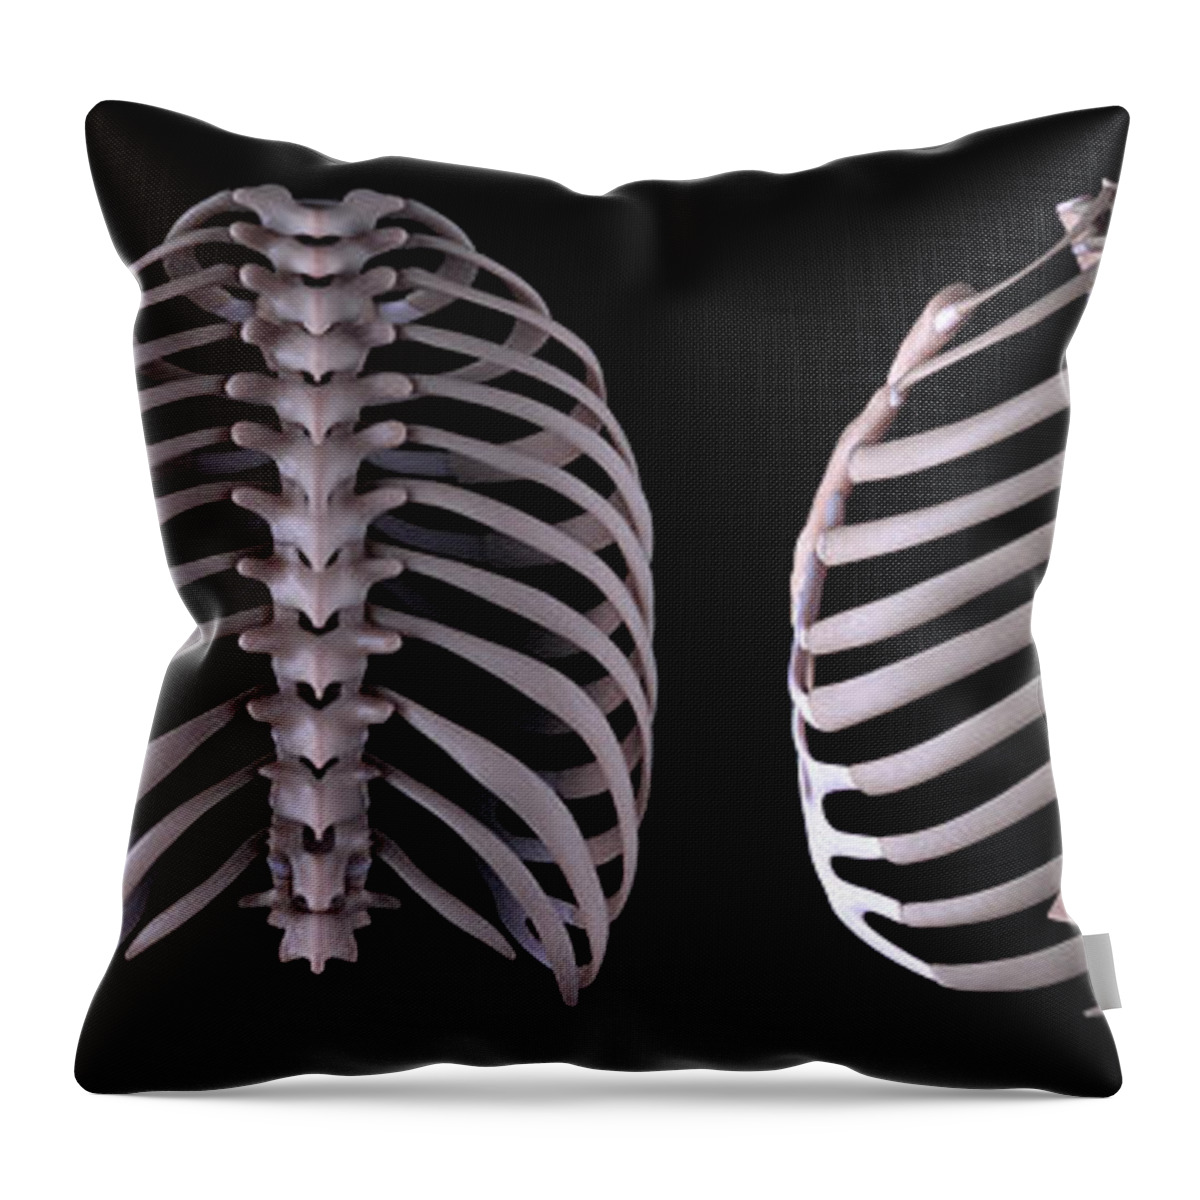 Anatomical Model Throw Pillow featuring the photograph Multiple View Of The Rib Cage by Science Picture Co